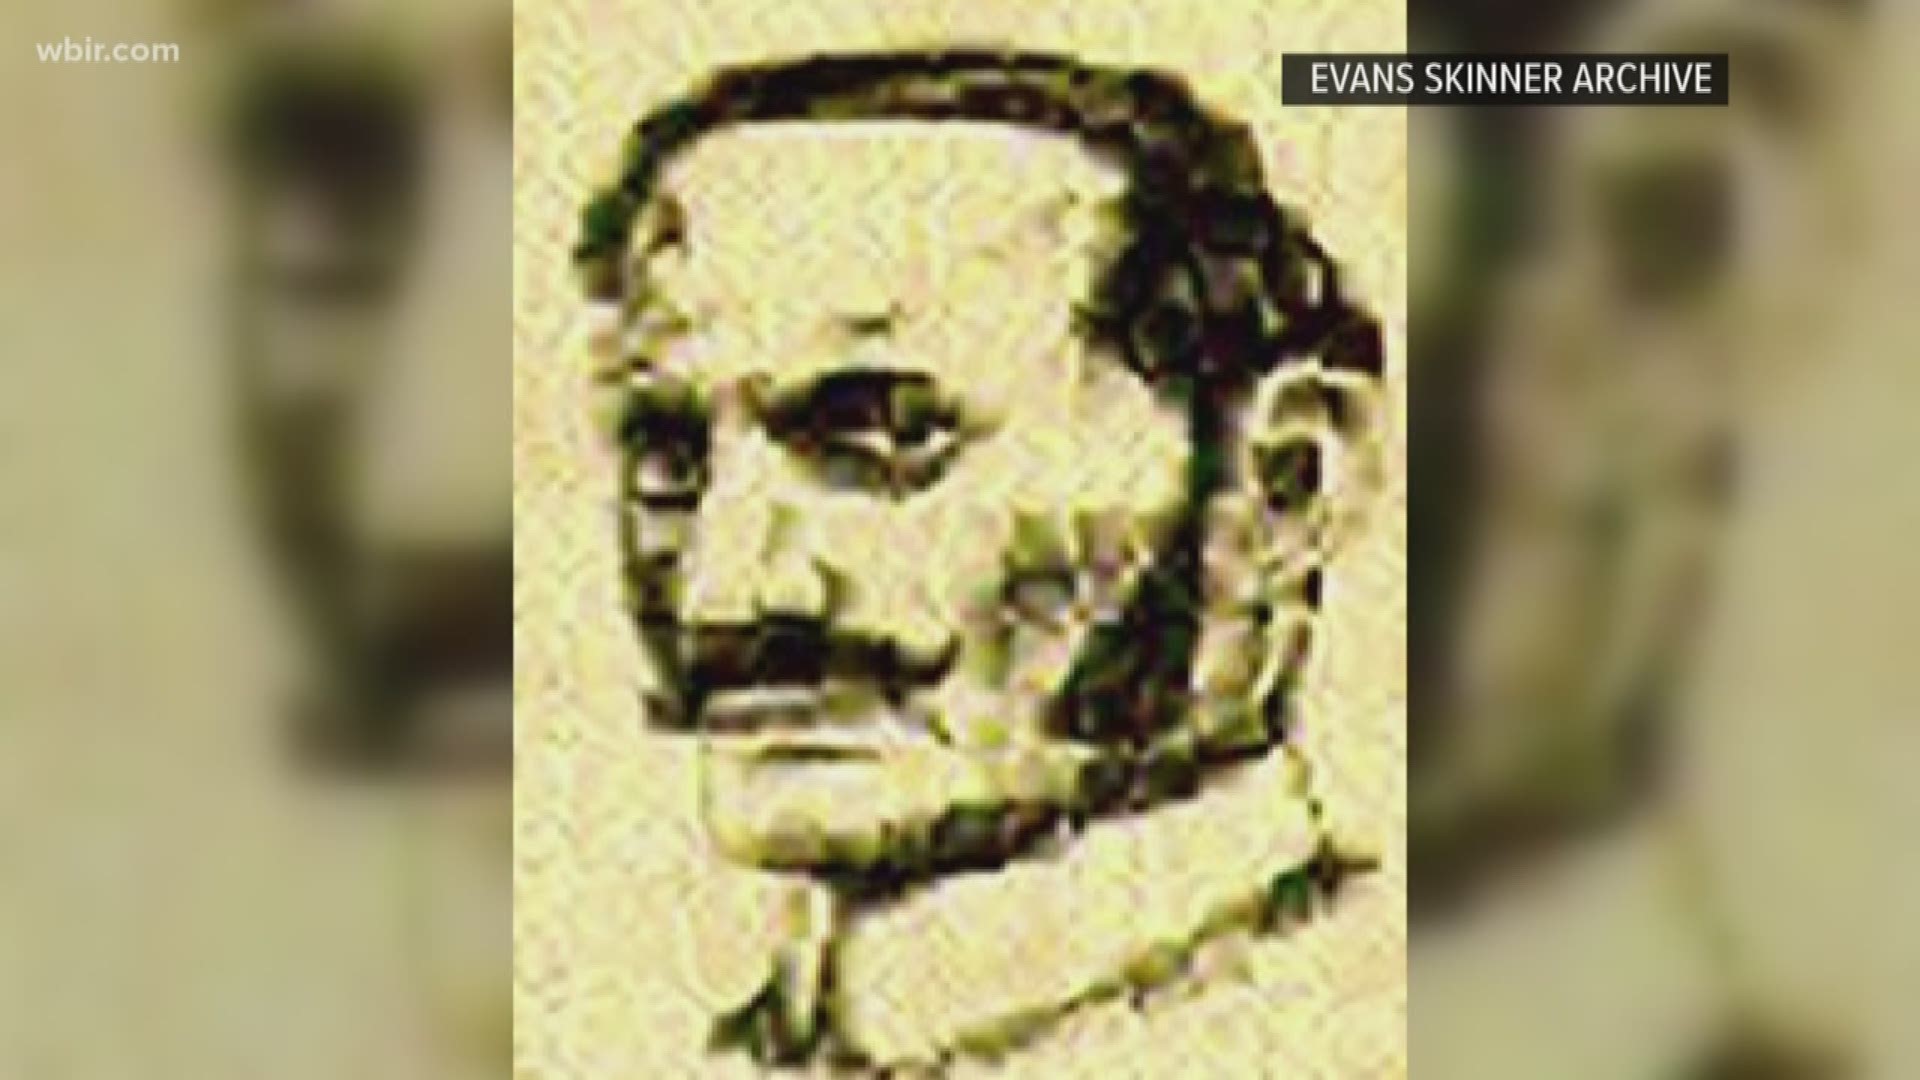 A new study released yesterday identified the infamous serial killer Jack the Ripper, as 23-year-old Polish barber Aaron Kosminski.

However, Dawnie Steadman, director of the Forensic Anthropology Center at the University of Tennessee in Knoxville, also known as The Body Farm, warns this one study does not completely close the case.